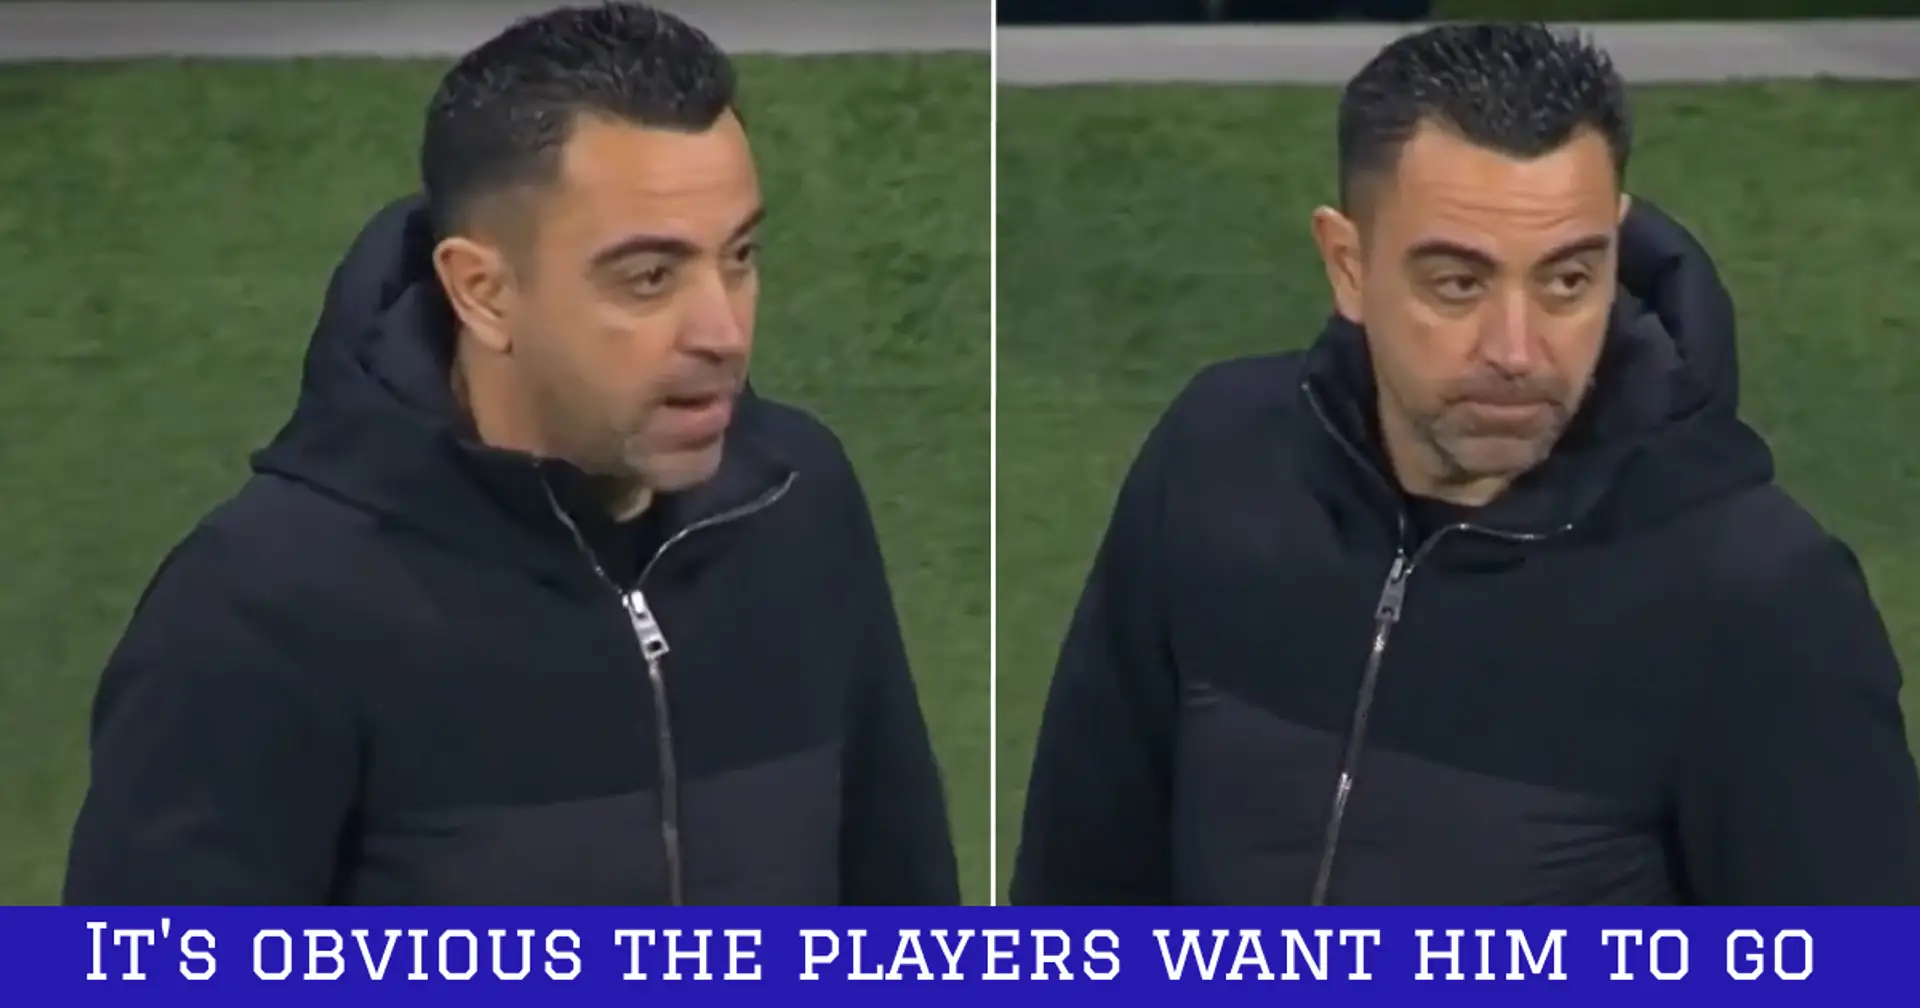 'The devil we know' v 'Leave my club': Culers have their say on Xavi STAY after season turnaround